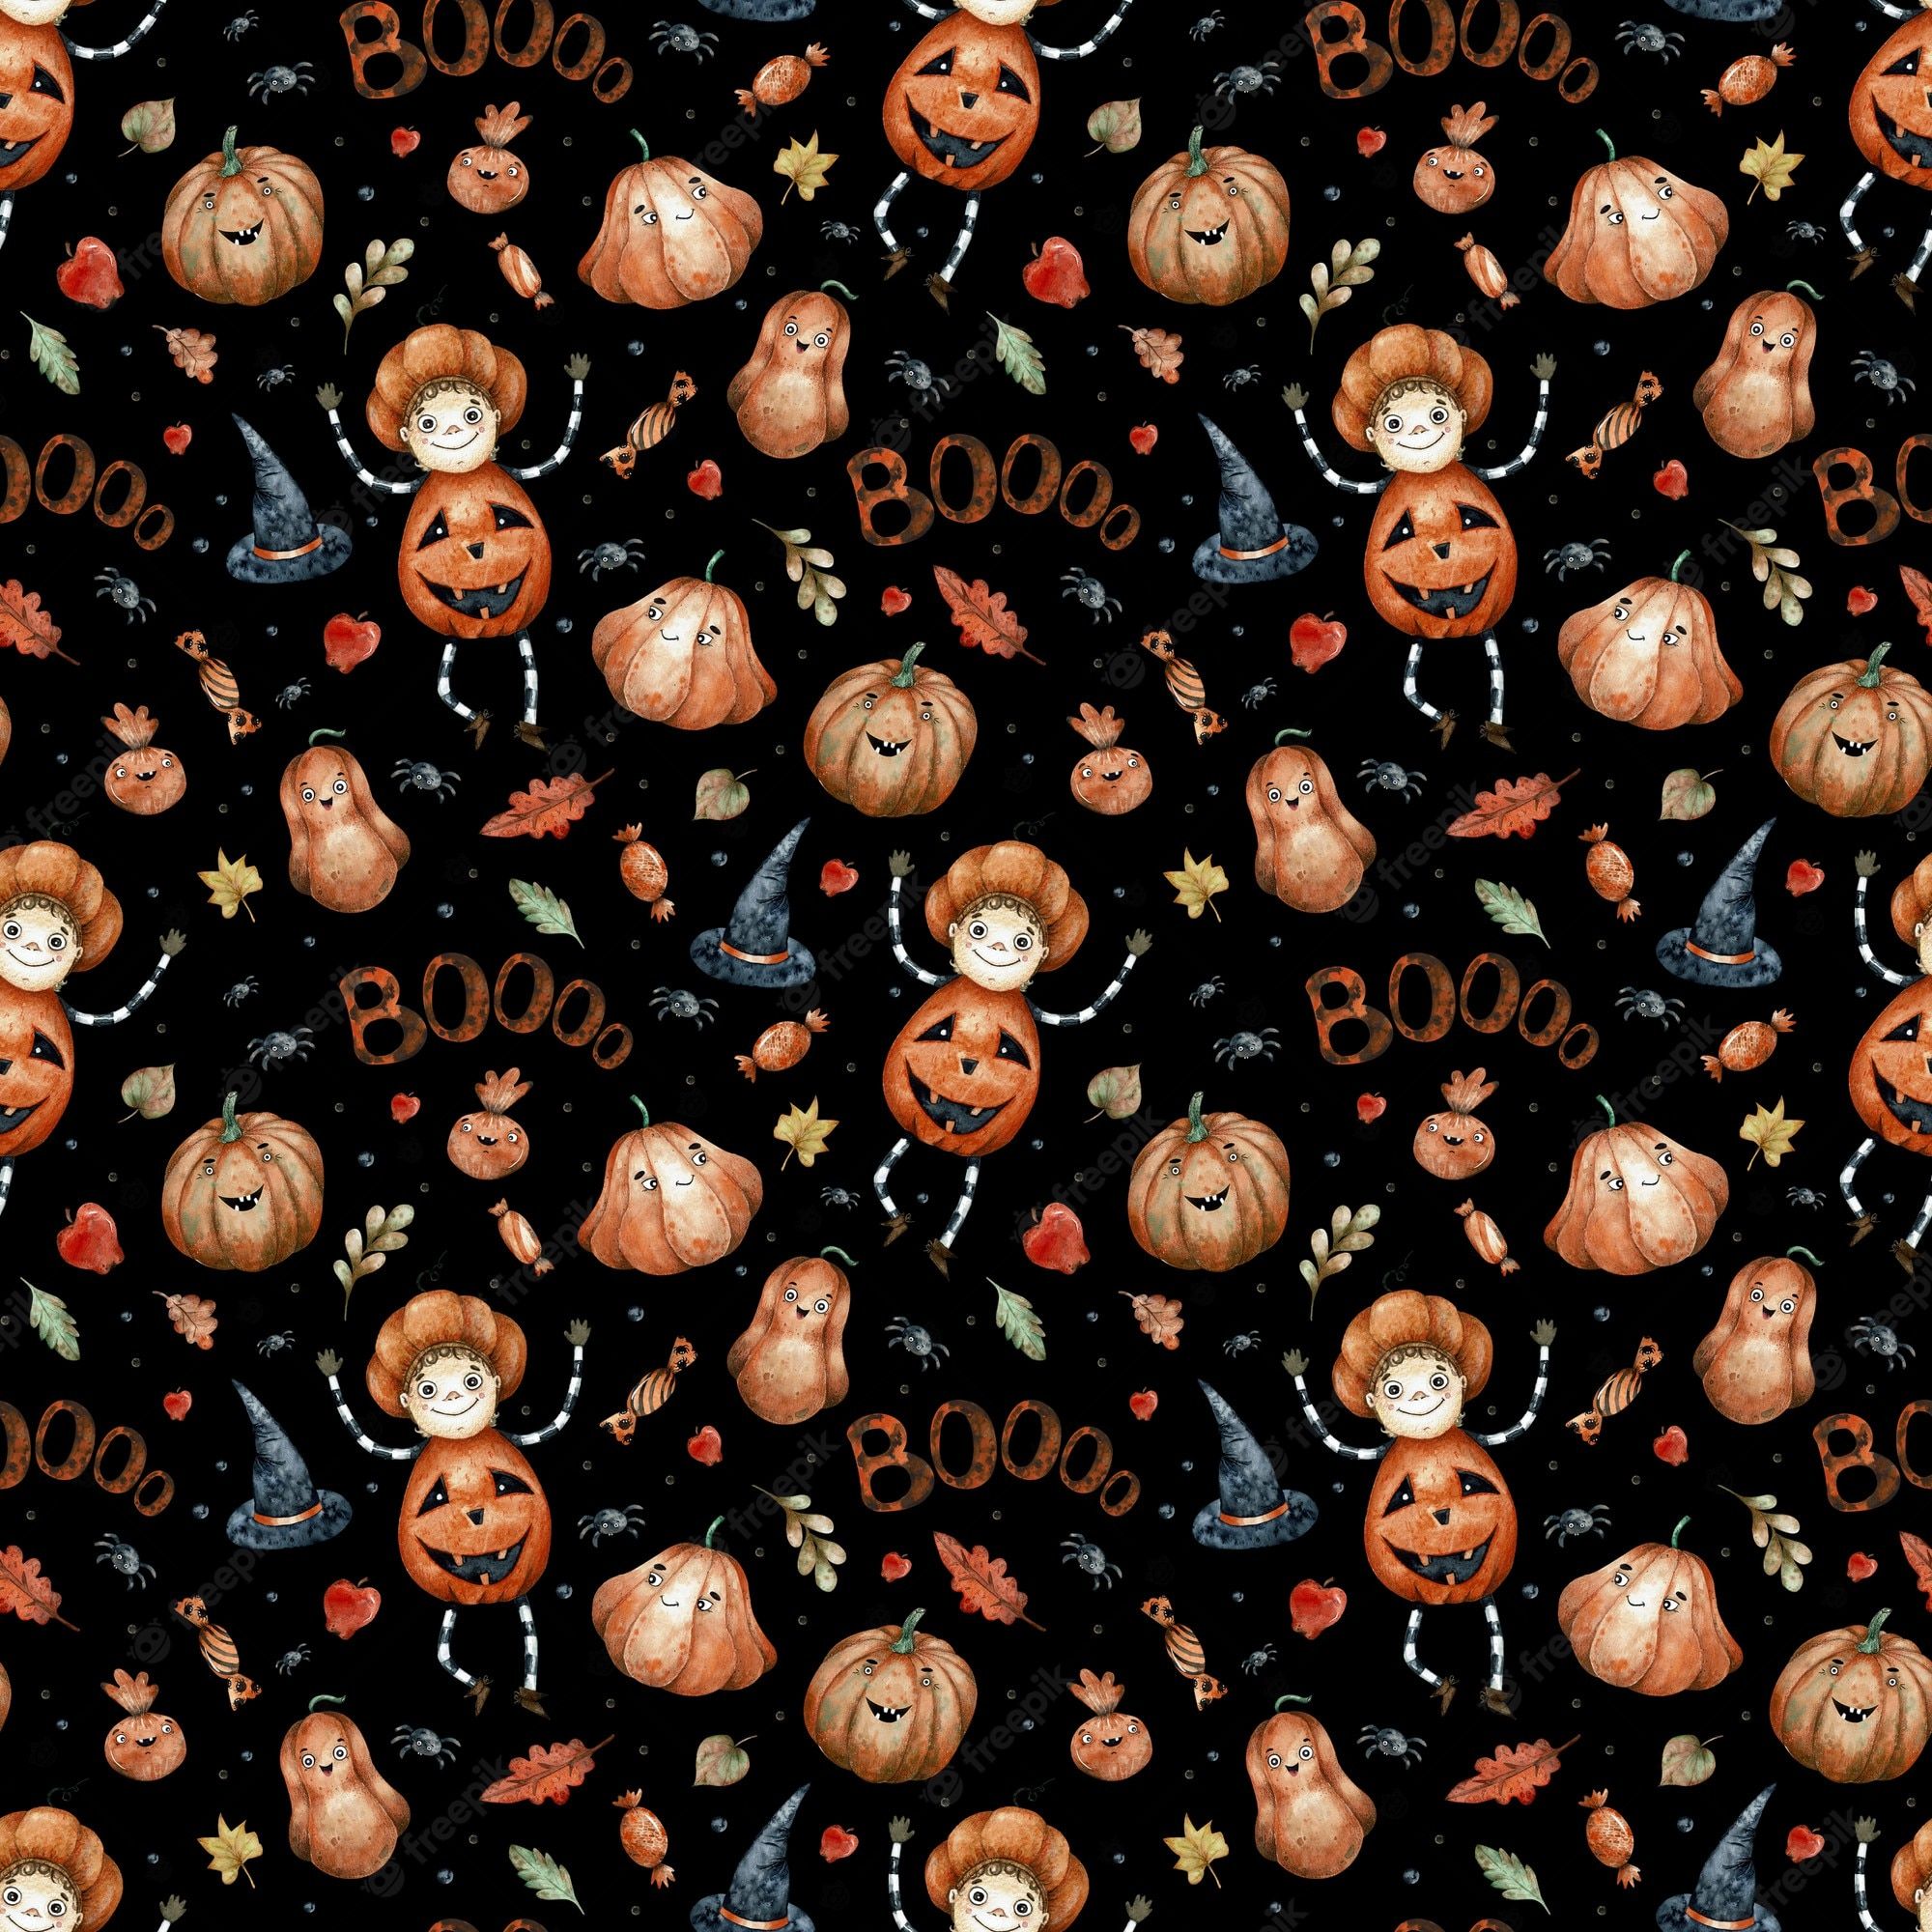 Premium Photo. Watercolor seamless pattern with orange halloween candies, pumpkins, mushrooms, black hats and spikes. halloween decoration endless background